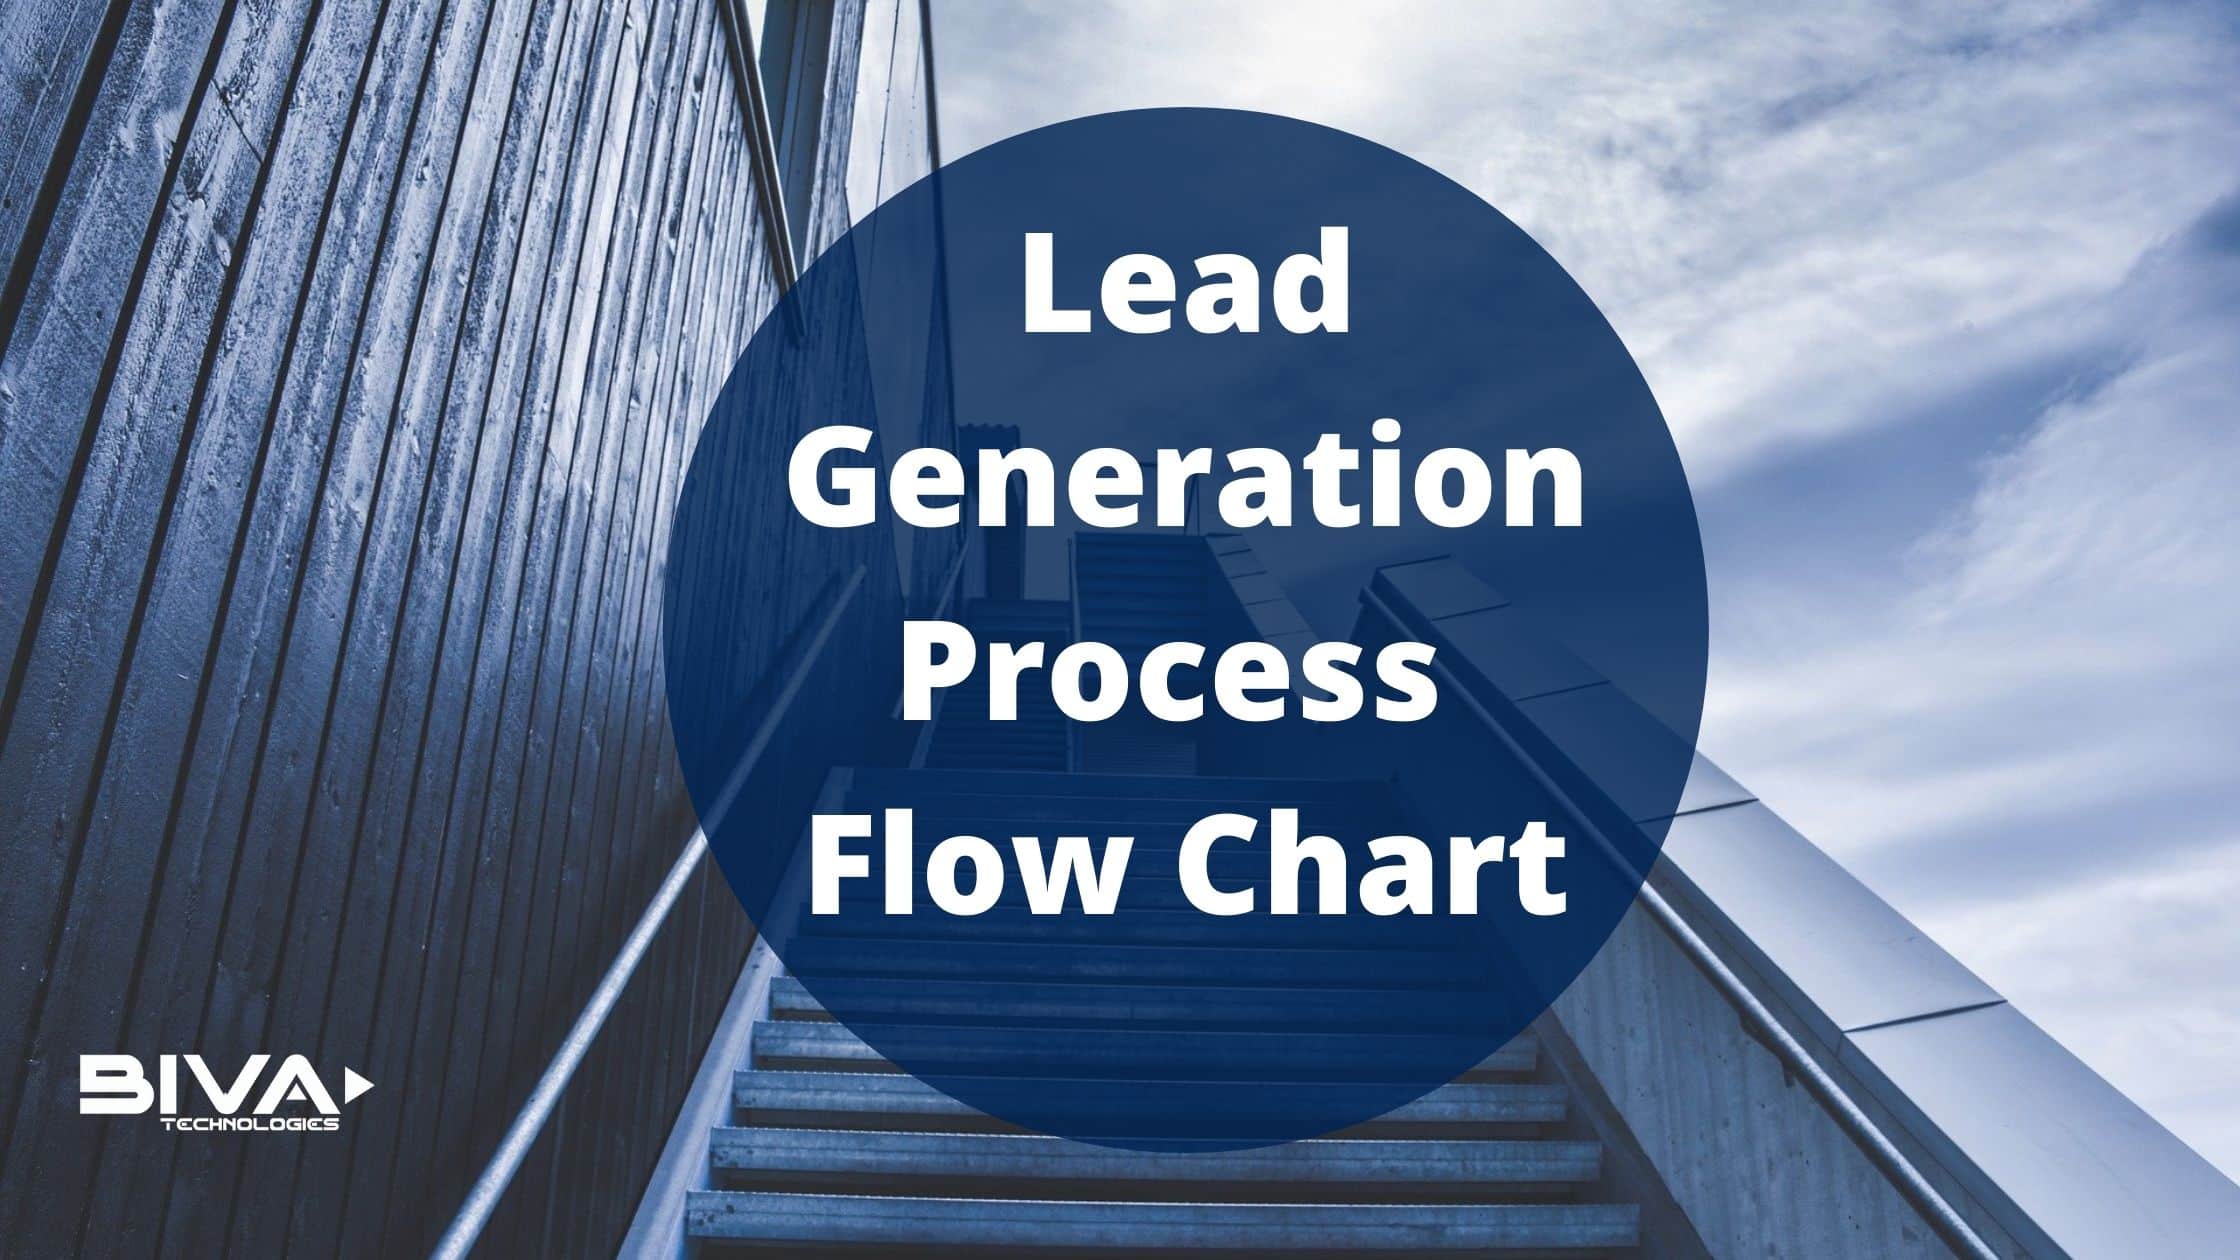 100% lead generation process flow chart for small business